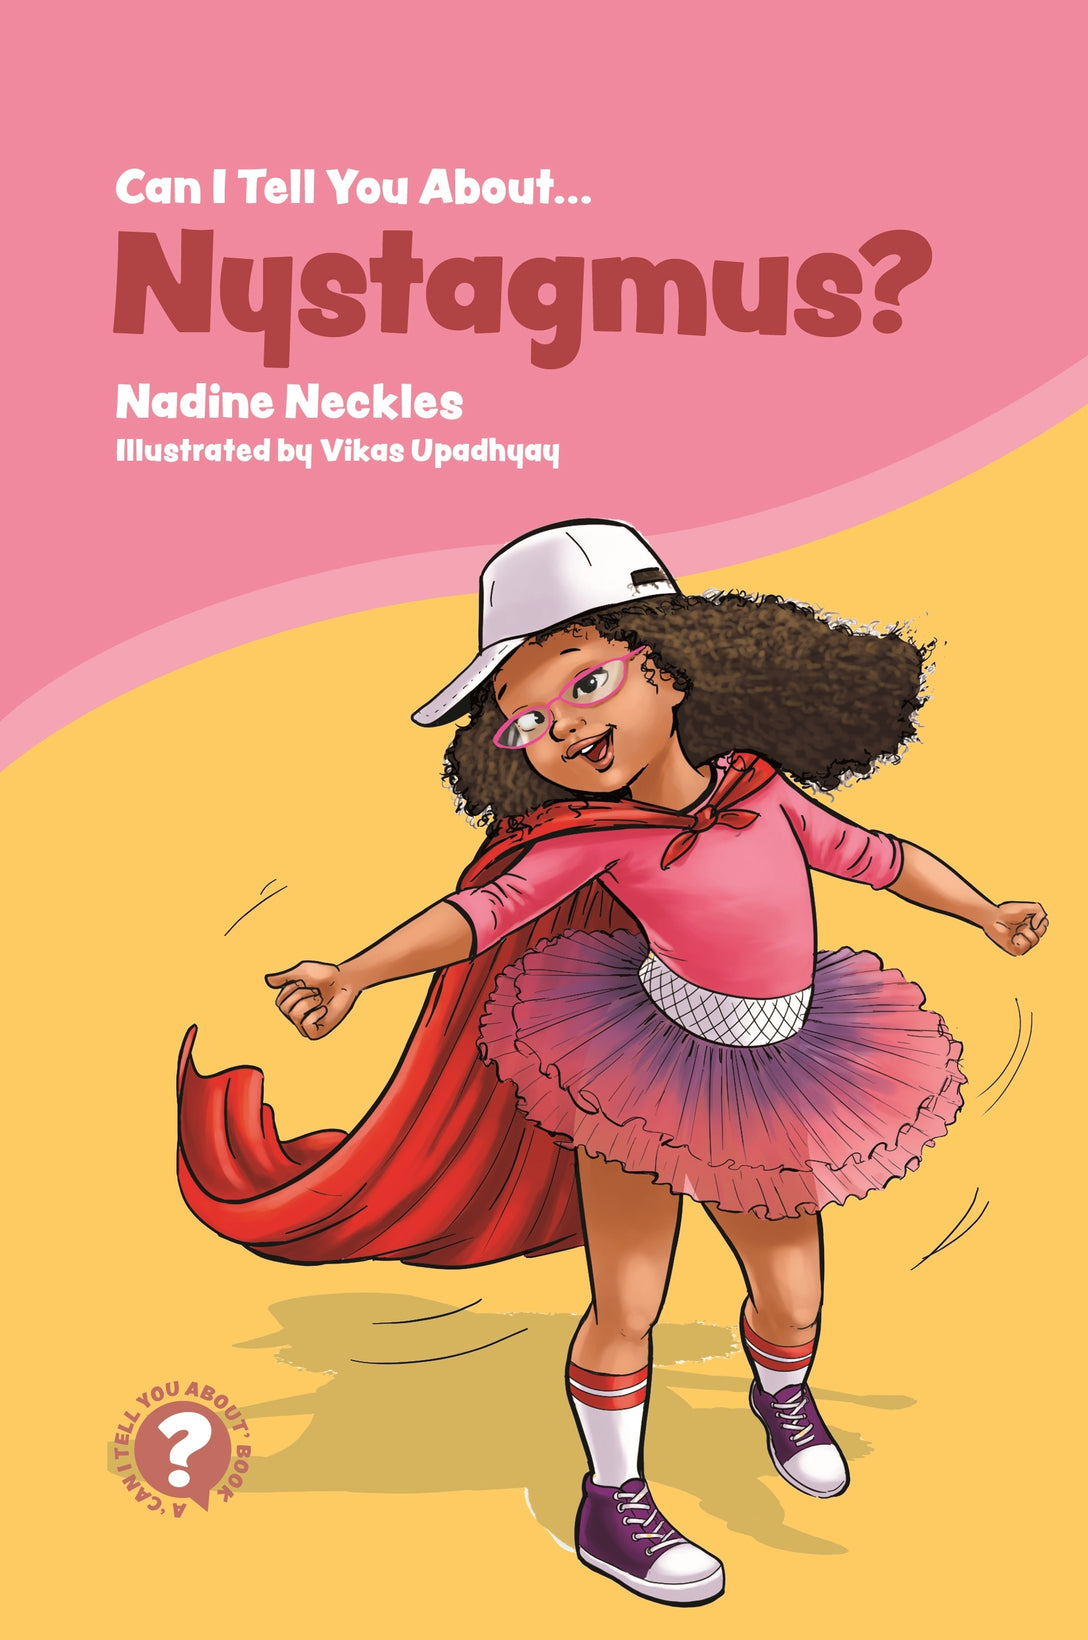 Can I tell you about Nystagmus? by Vikas Upadhyay, Nadine Neckles